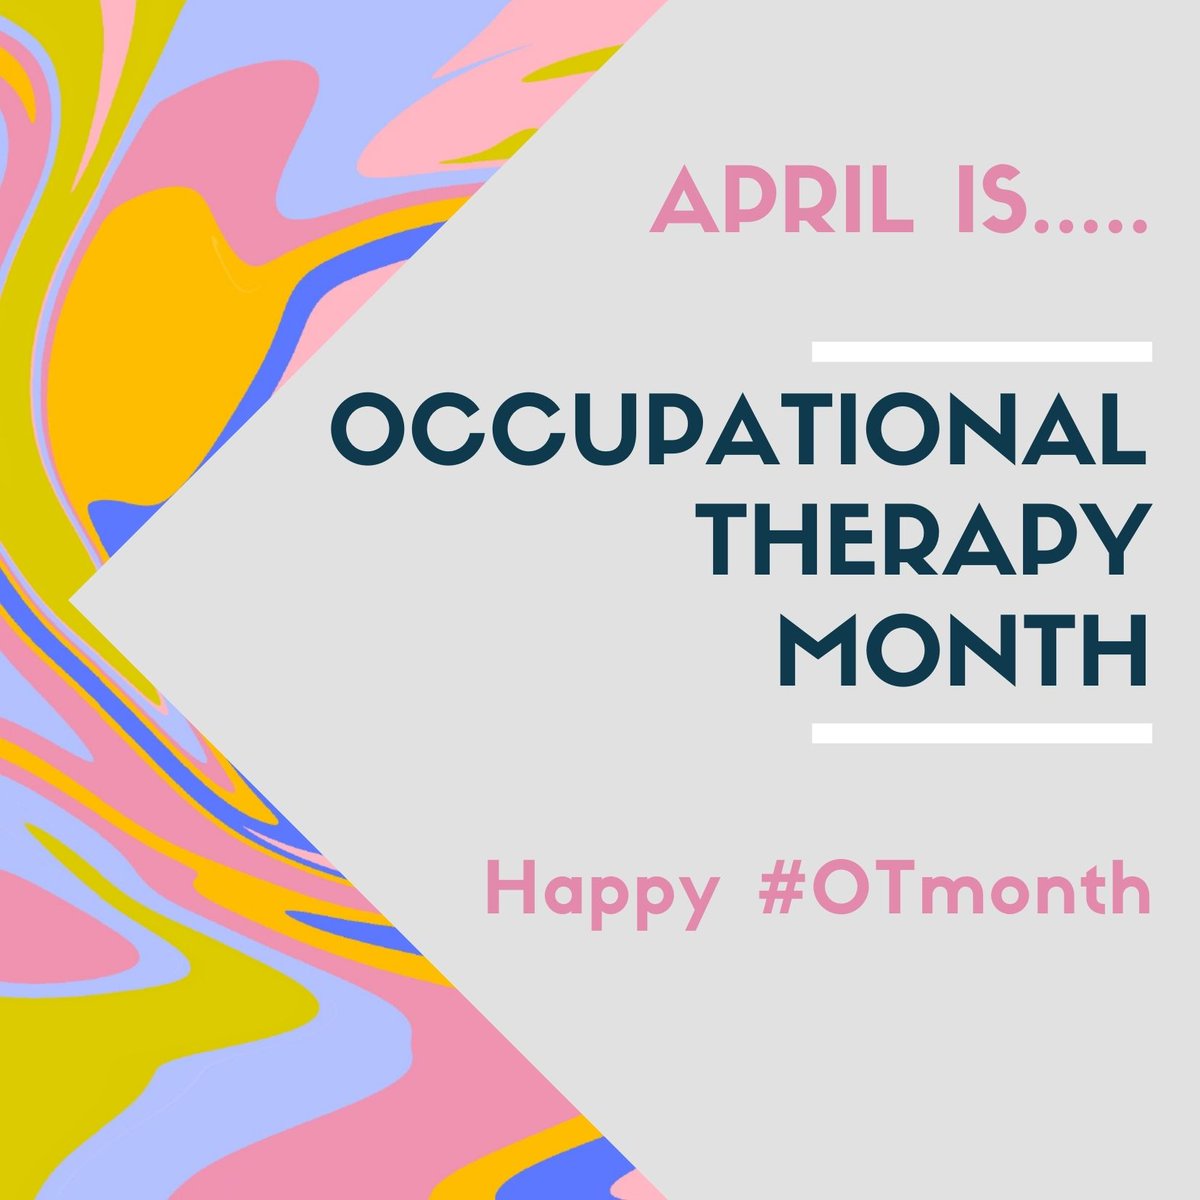 Happy Occupational Therapy month, all! We hope you'll join us this month in looking for more ways to get involved in OT advocacy--like joining our OTAC PAC wine mixer April 25th (more to come on that soon). #OTmonth #OTadvocacy #occupationaltherapy